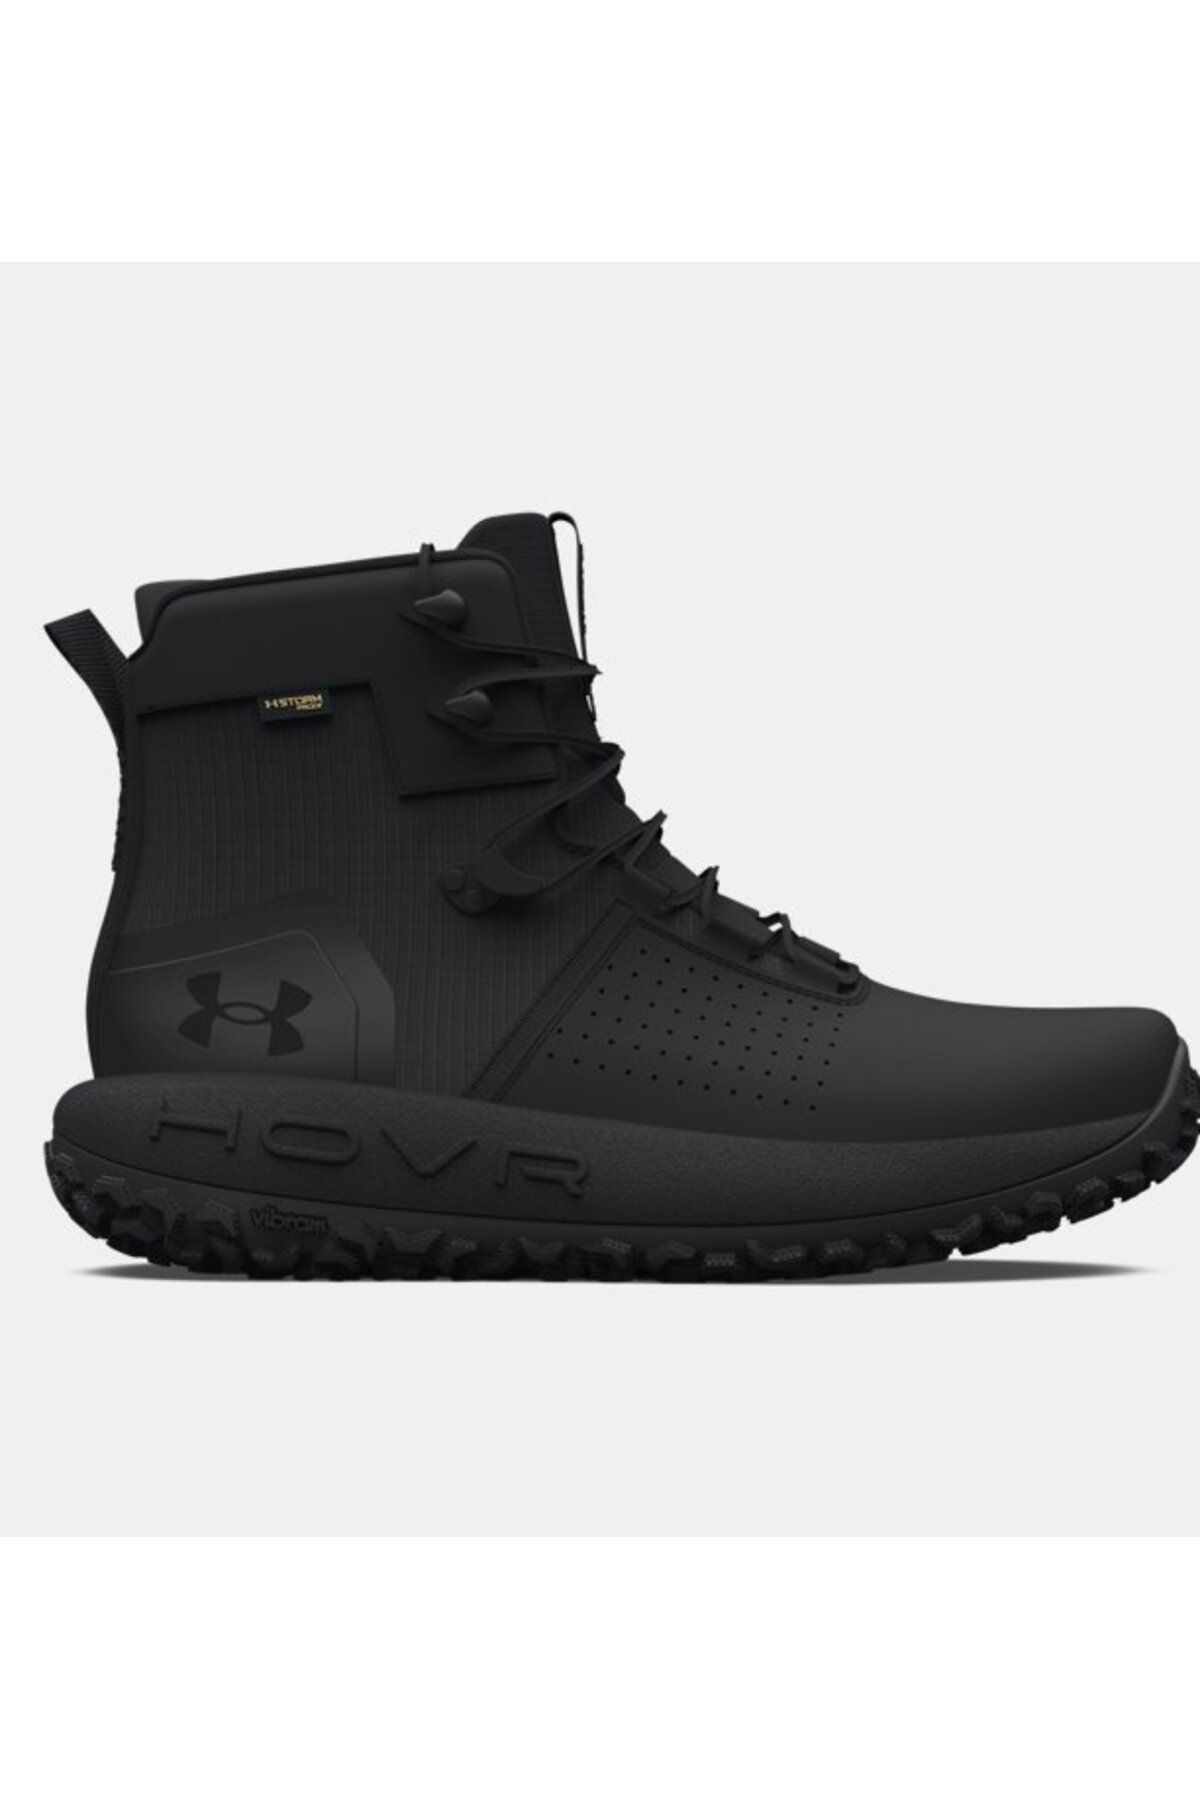 Under Armour Bot 3026737-001